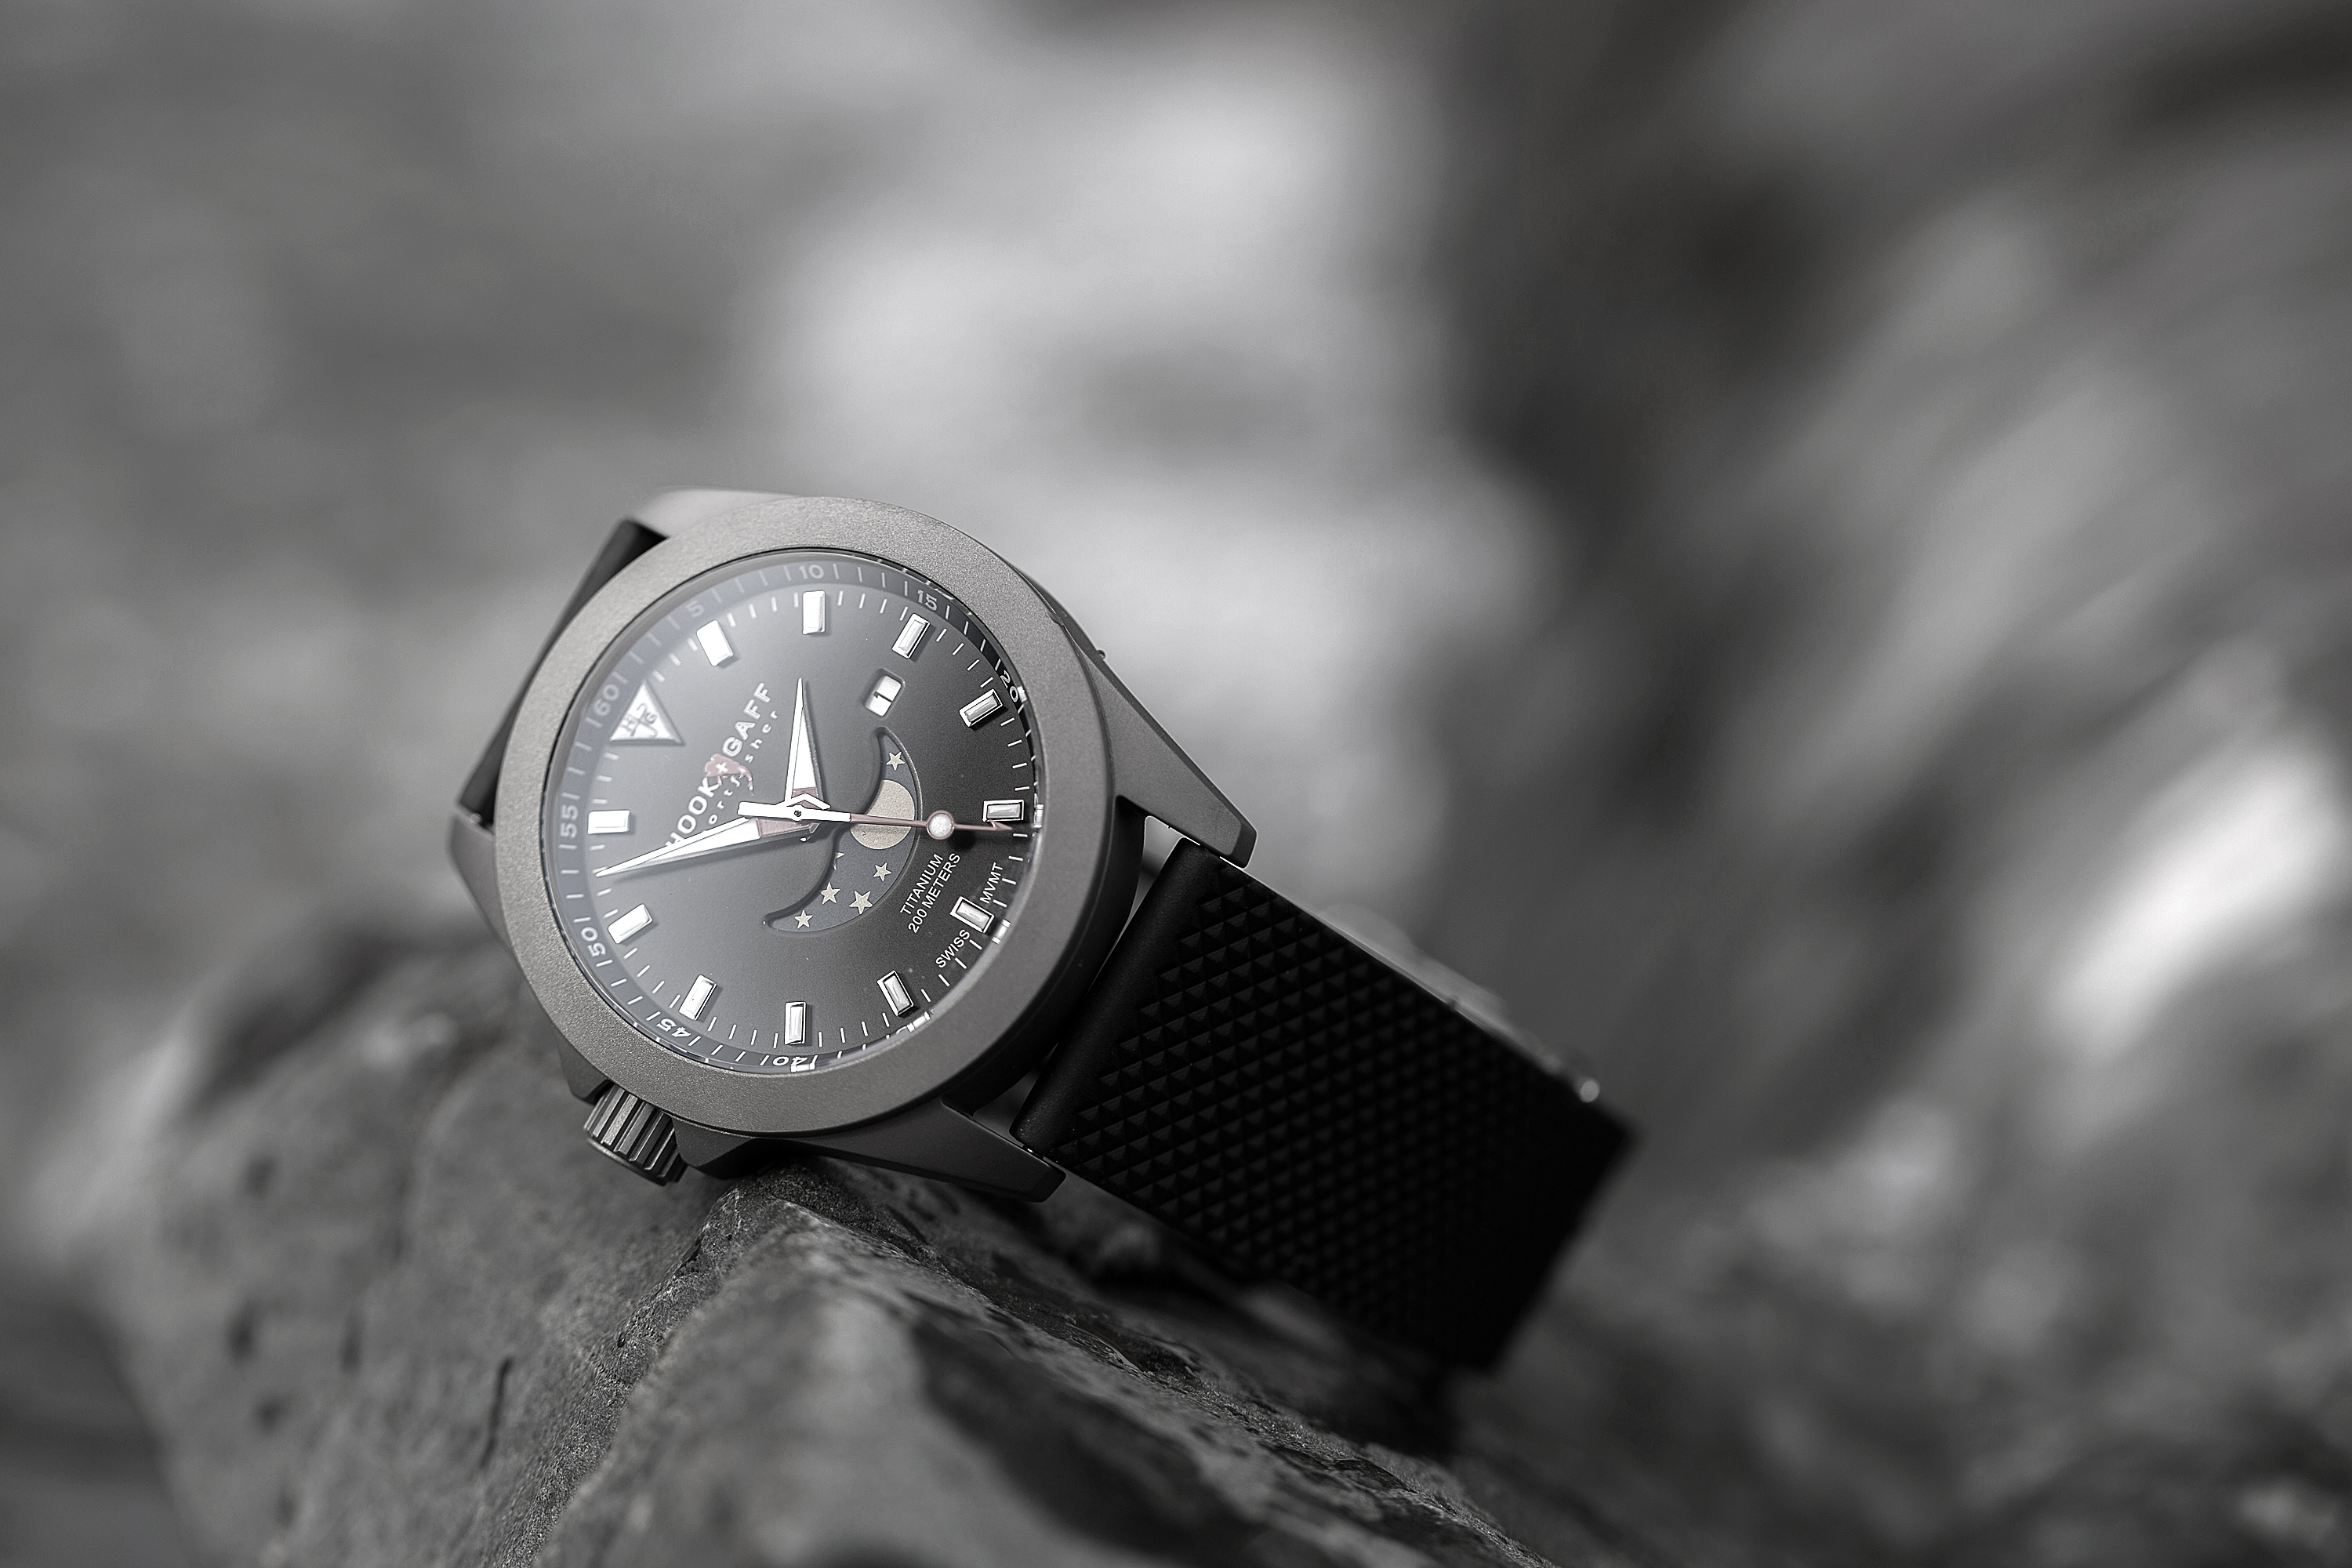 Hook + Gaff's Sportfisher II Moonphase Watch is Rugged and Multifunctional